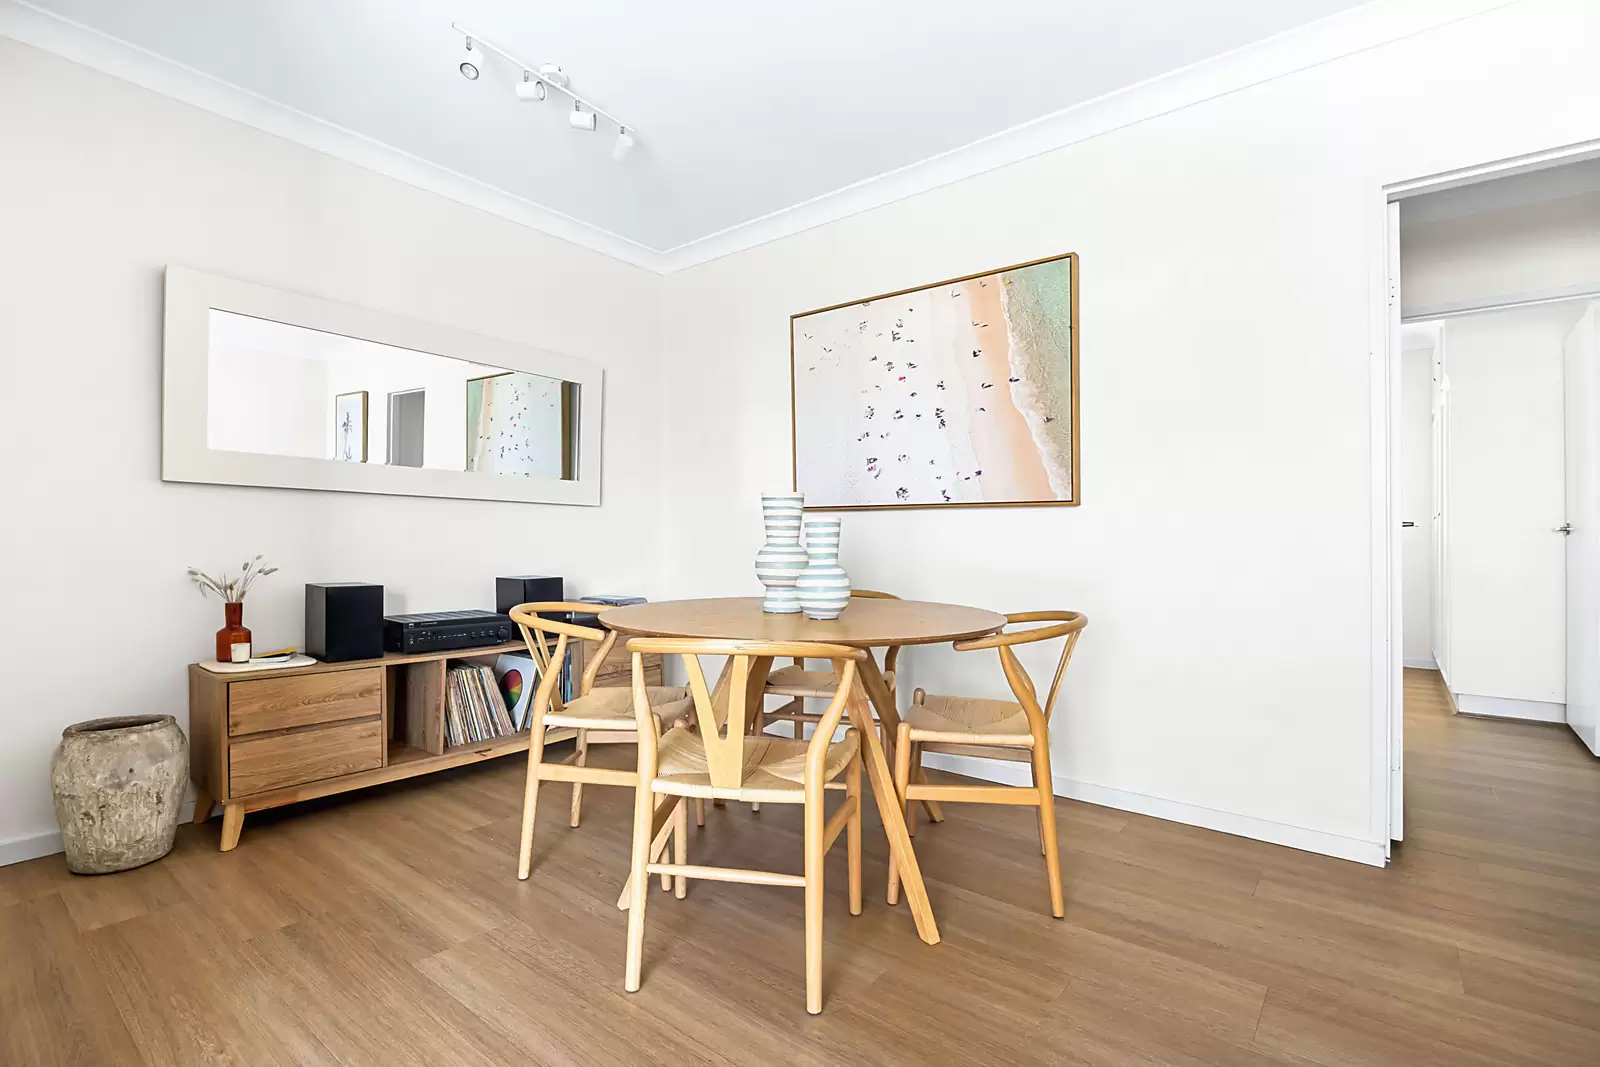 Photo #8: 4/23-25 Vicar Street, Coogee - Sold by Sydney Sotheby's International Realty